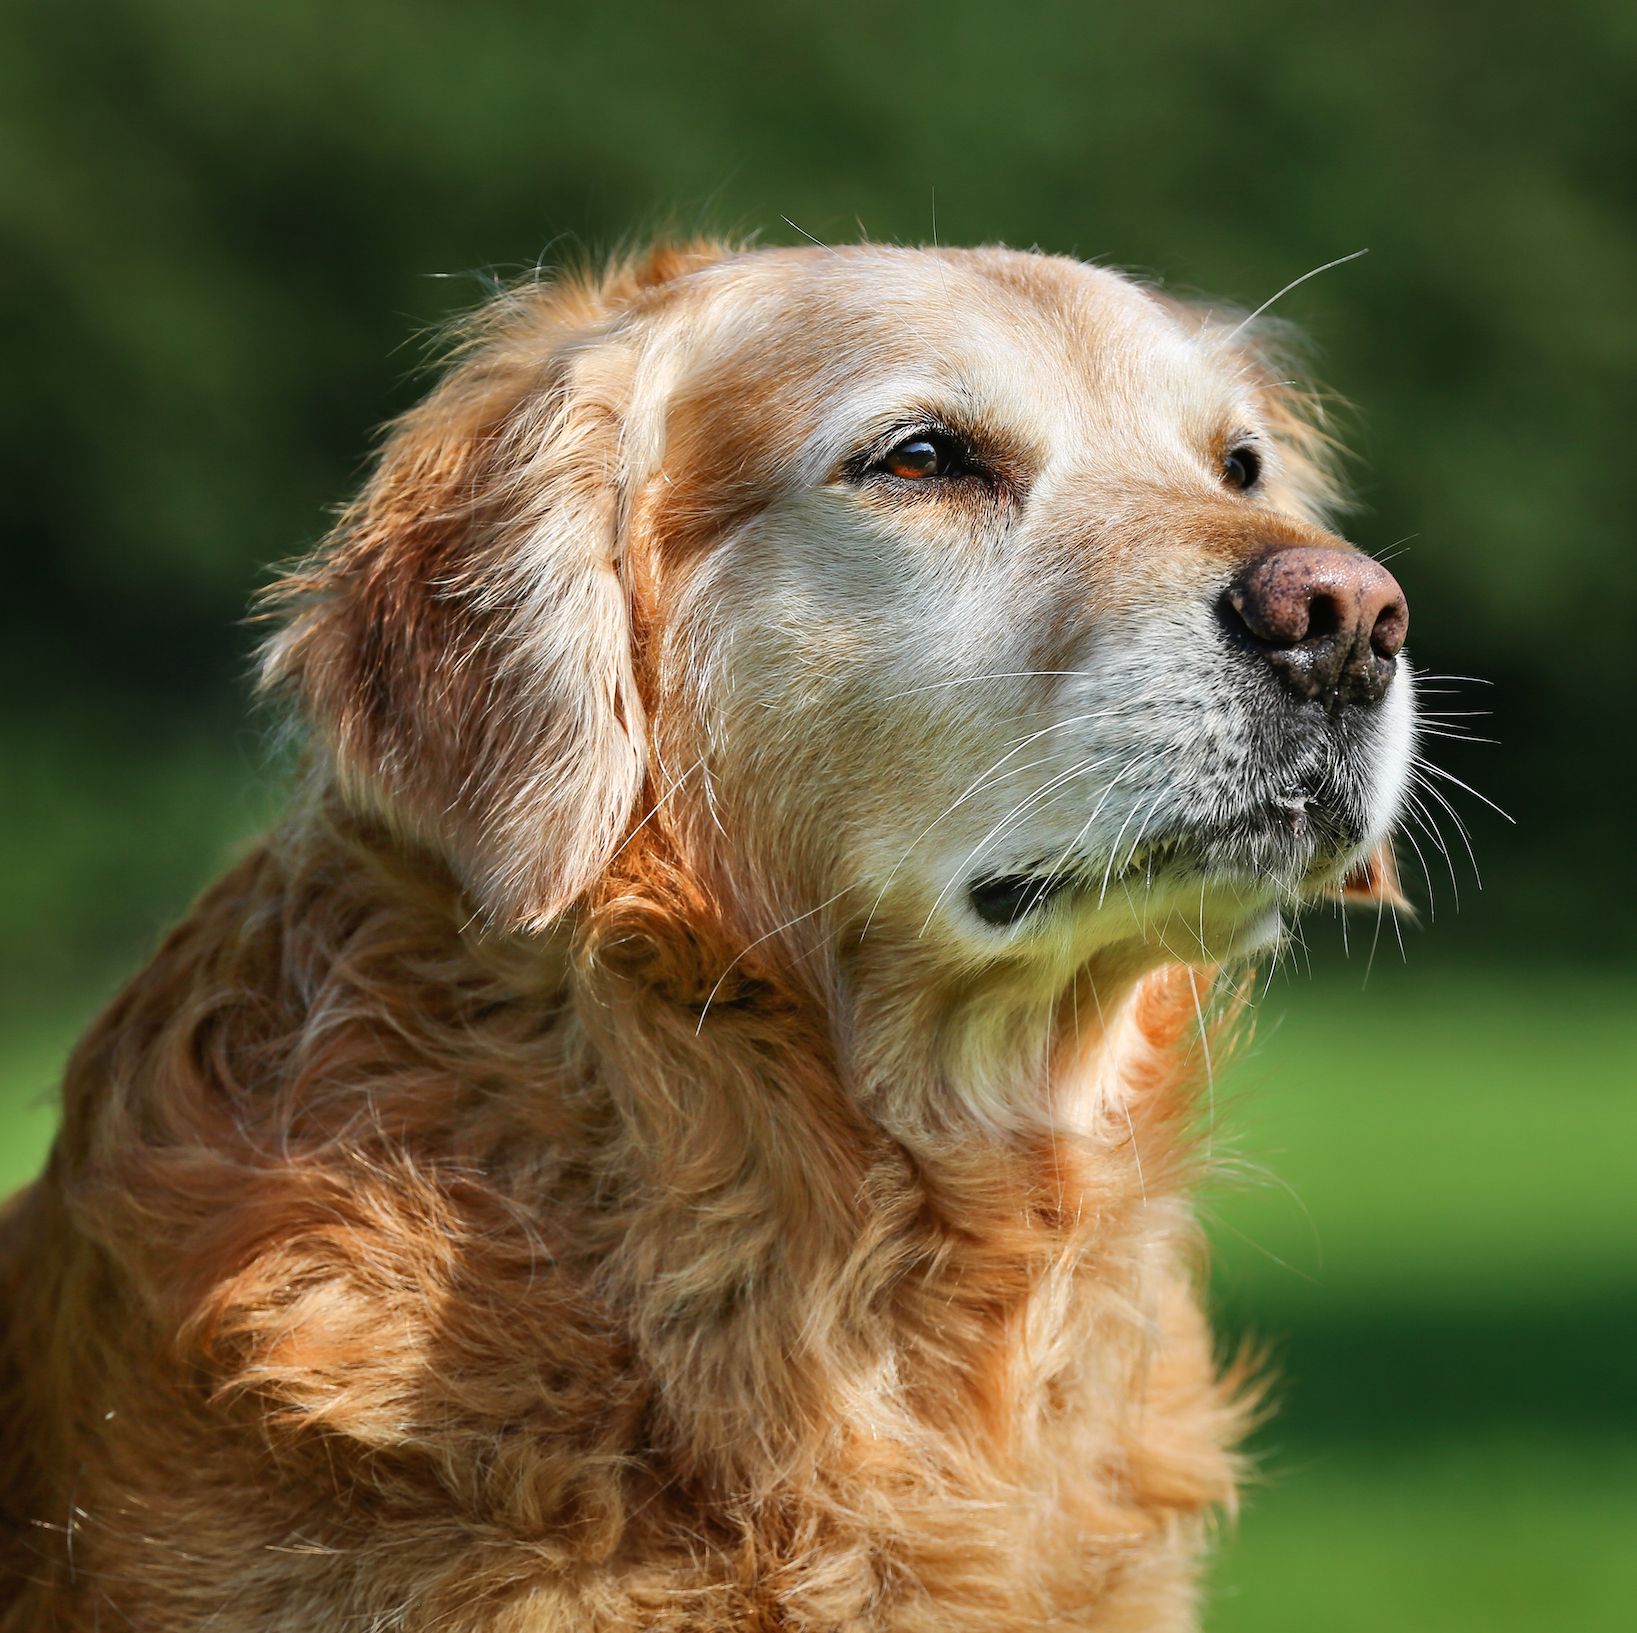 how to care for an older dog